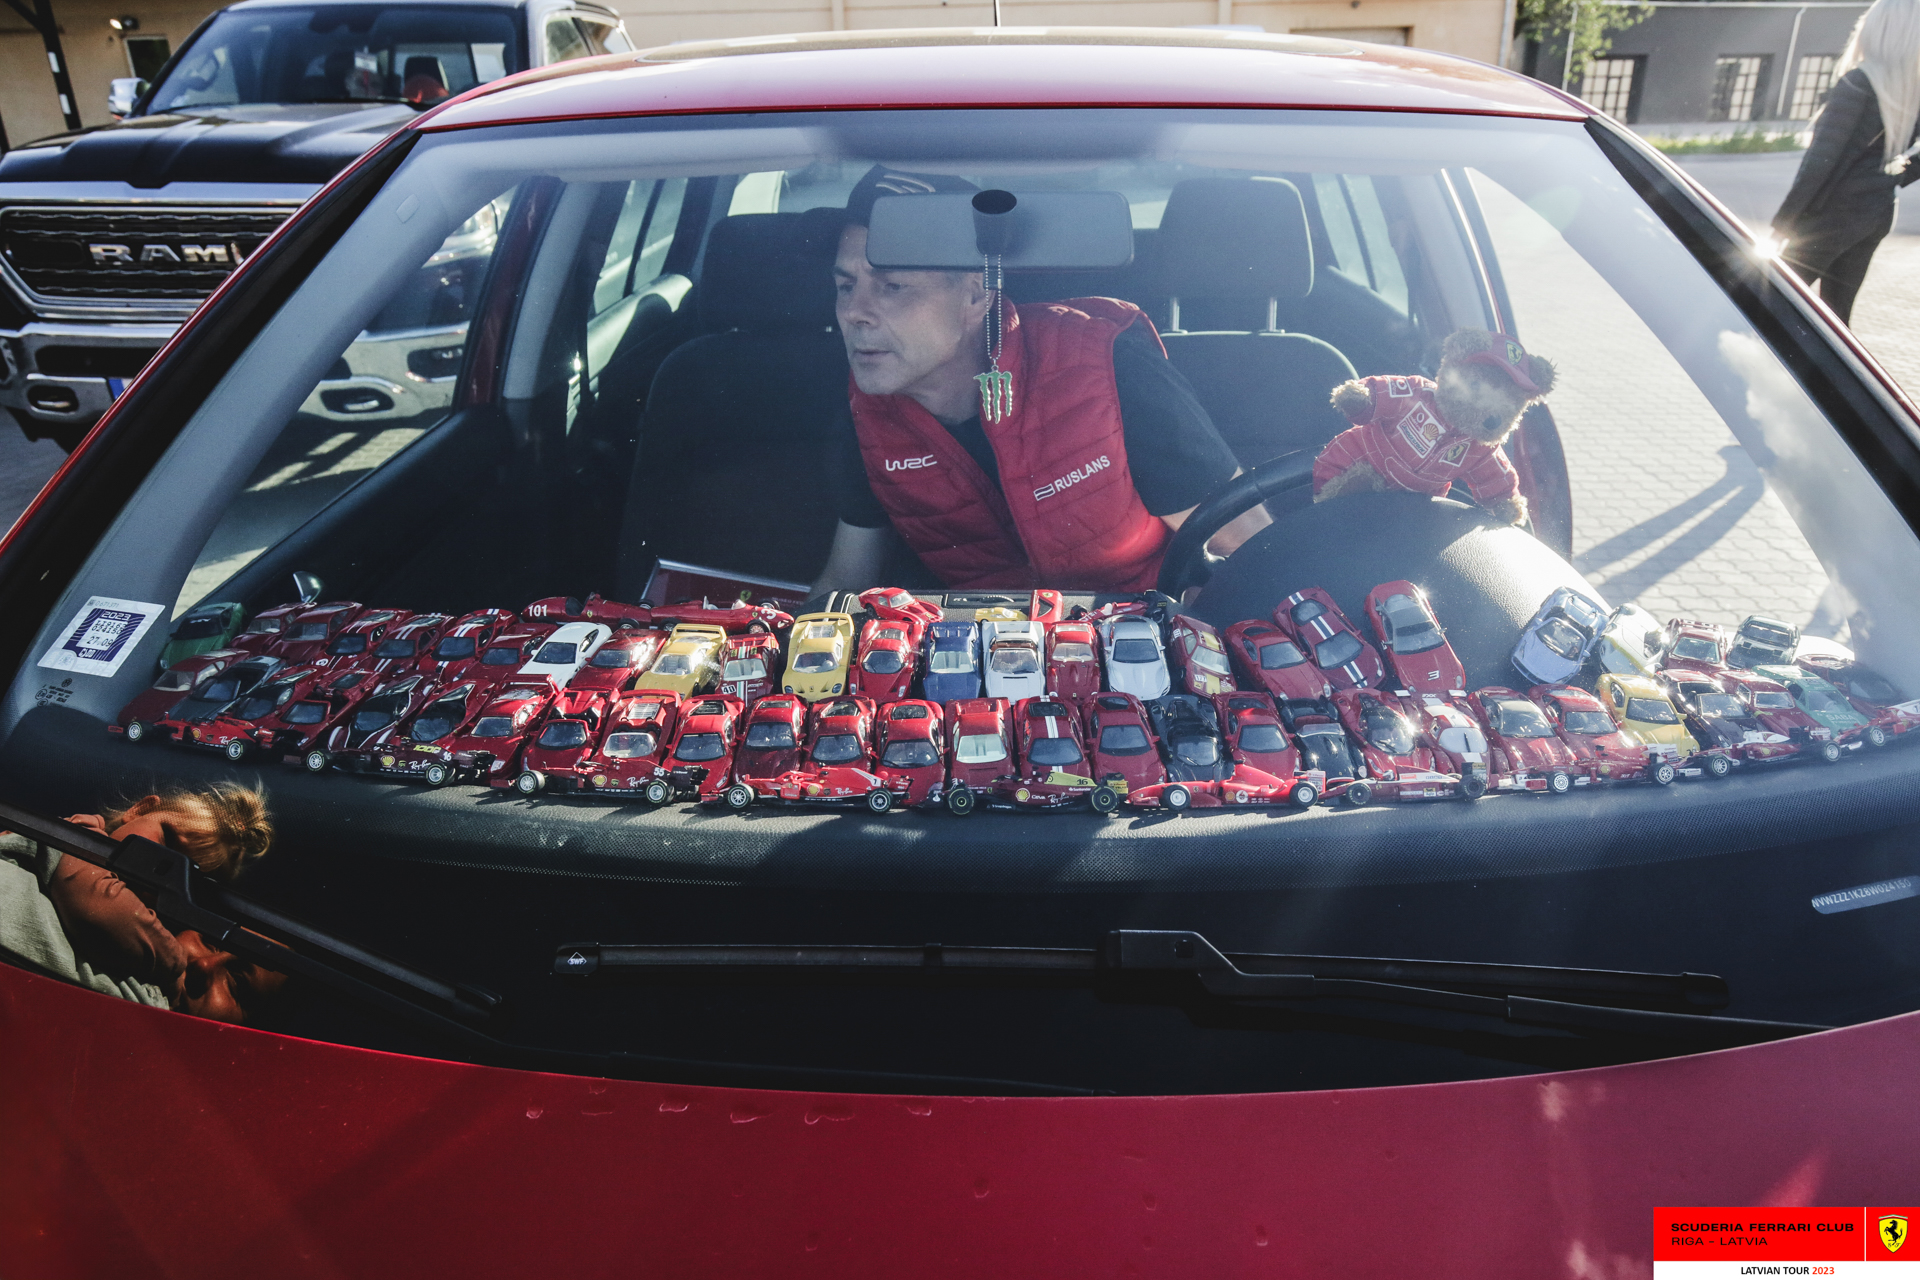 This super Ferrari fan has filled the dashboard of his car with a lot of small Ferraris. 